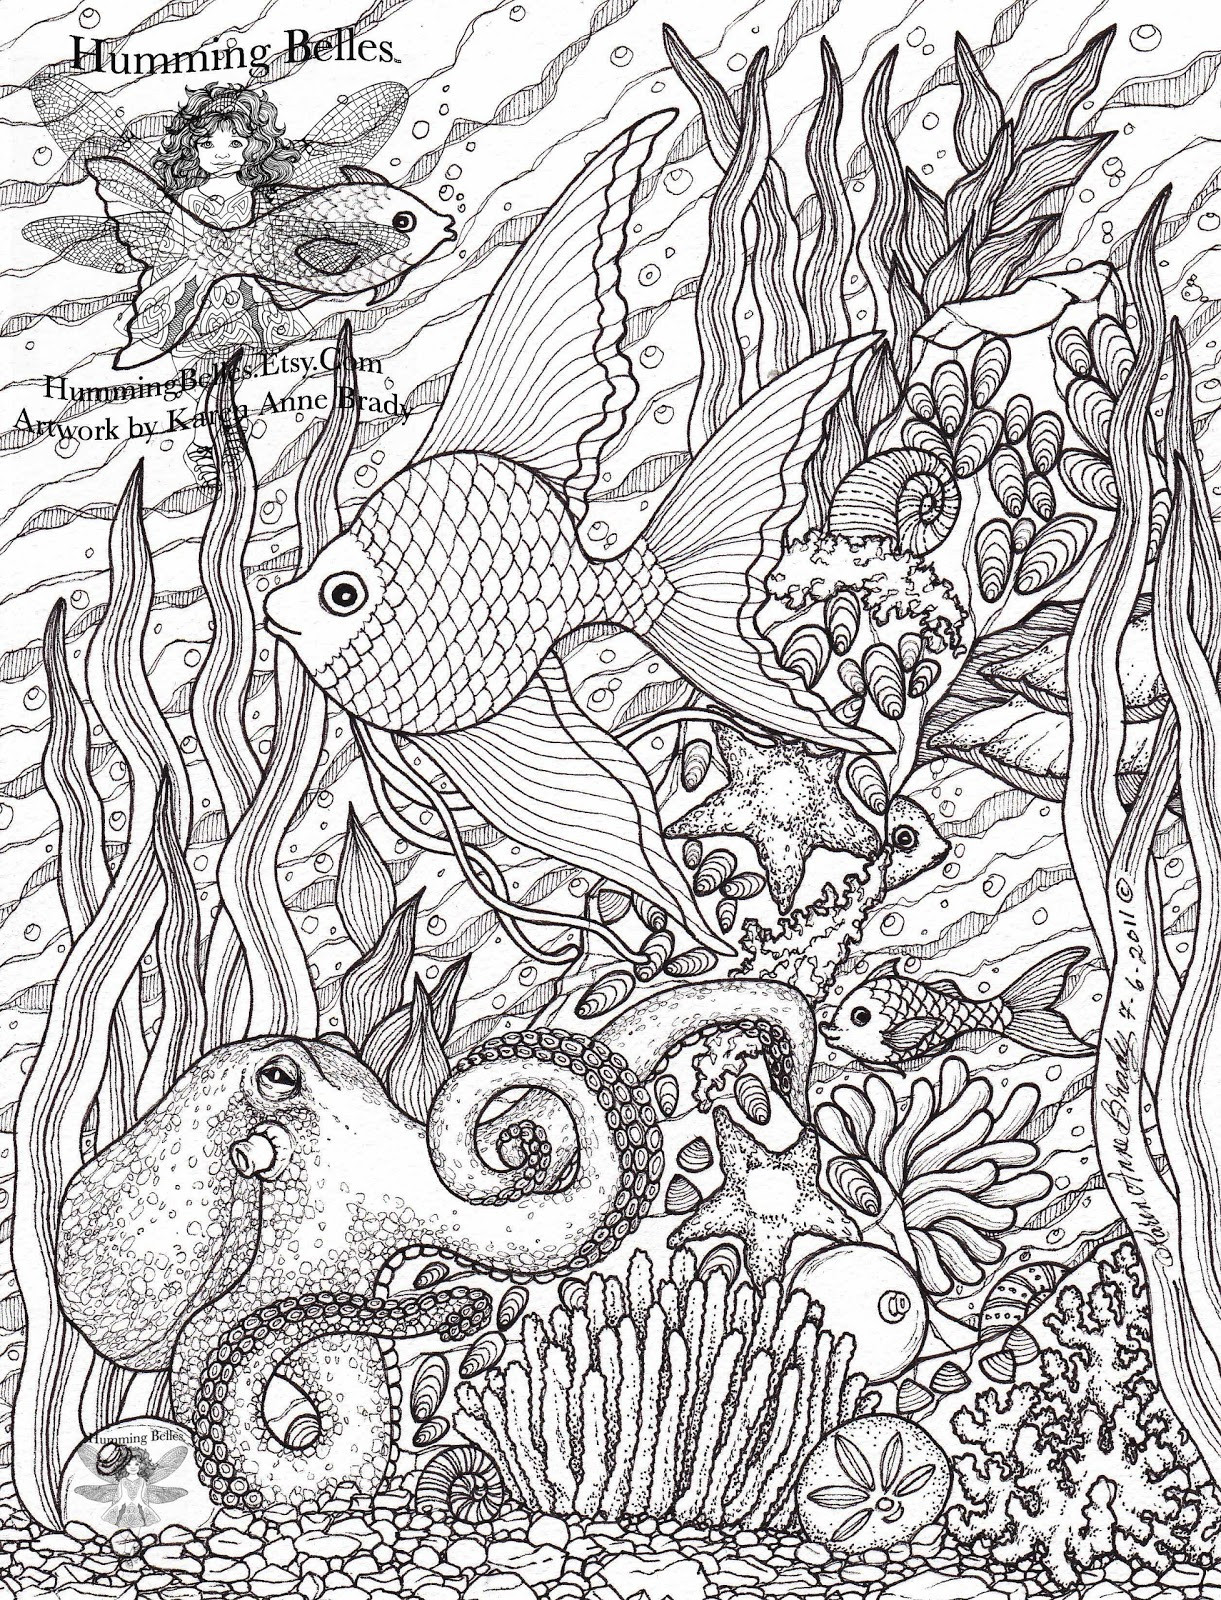 Difficult Coloring Pages For Adults
 Humming Belles" New Undersea Illustrations and